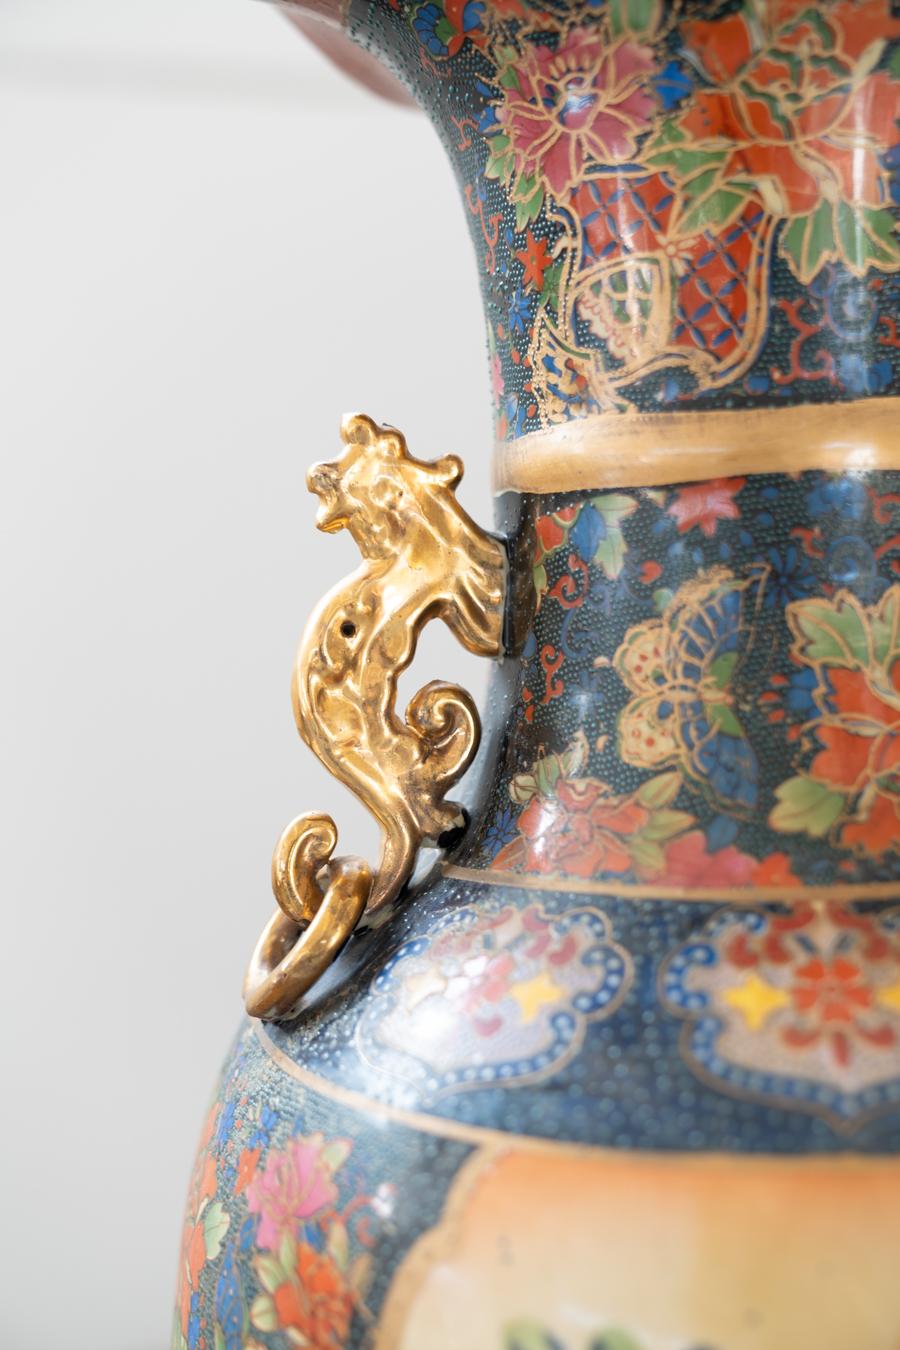 Large Chinese GOLDEN SATSUMA vase, Eastern Miji period
Style
Asian Antique
Periodo del design
Before 1890s
Production Period
Before 1890s
Year Manufactured
1850
Country of Manufacture
China
Material
Ceramica
Color
Blue, Gold, Yellow, Pink,